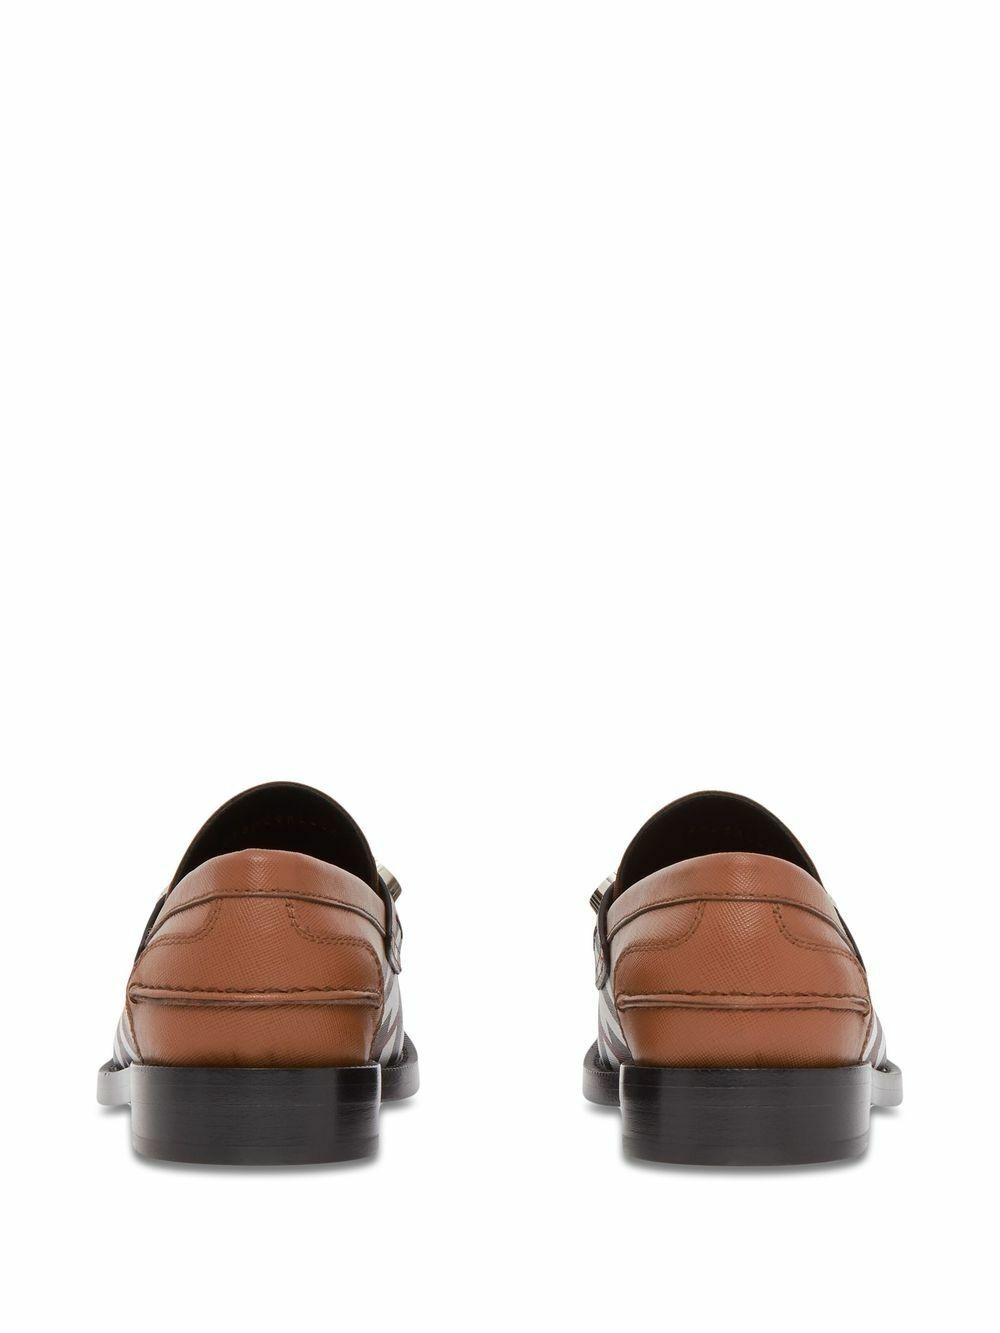 BURBERRY - Check Motif Leather Loafers Burberry